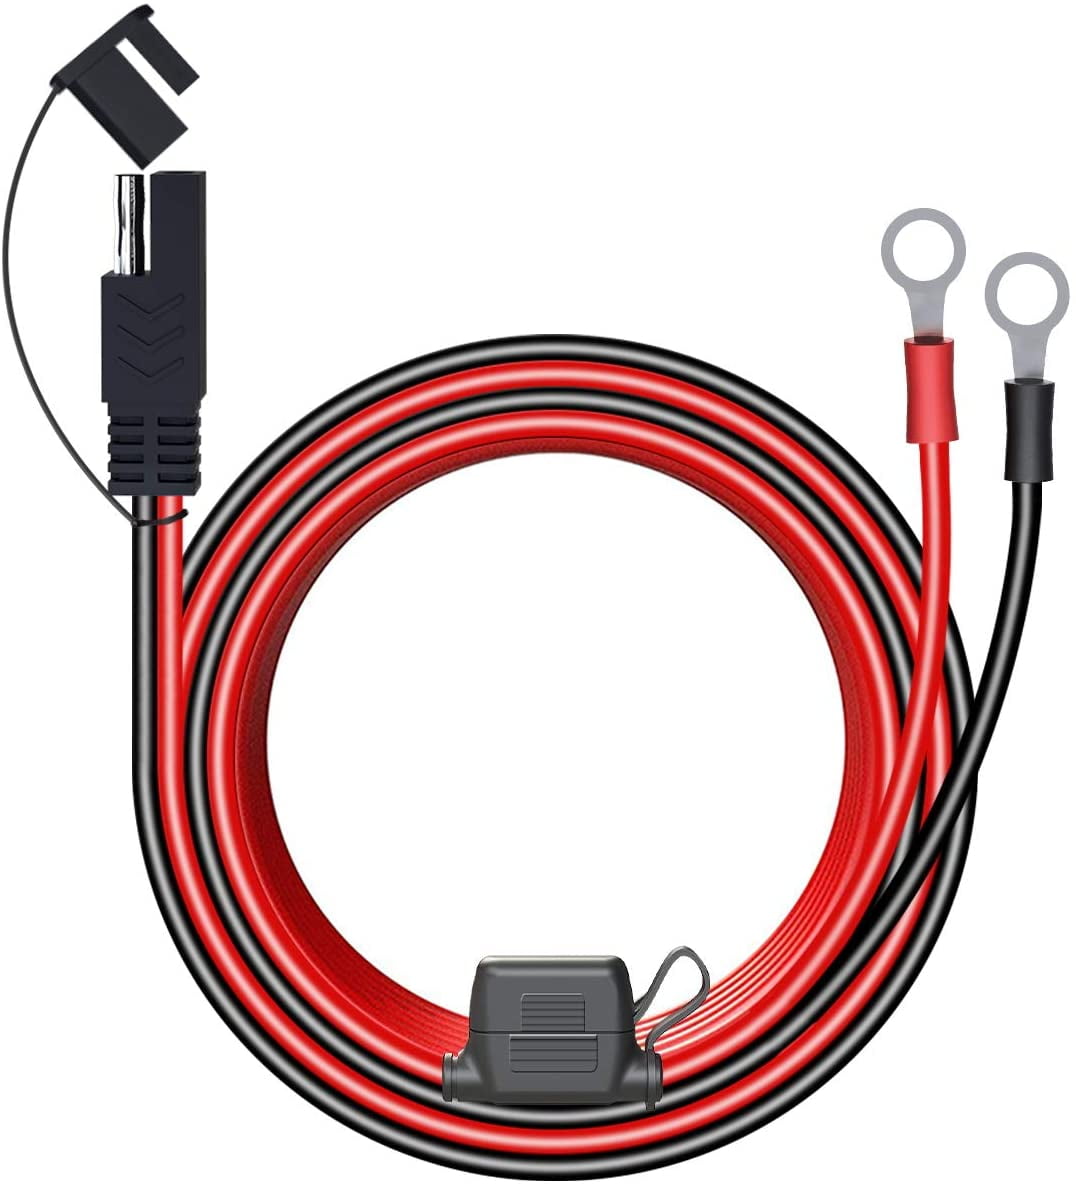 Battery Tender Harness Snap Cord Ring Charger Terminal Wire For Replacement 